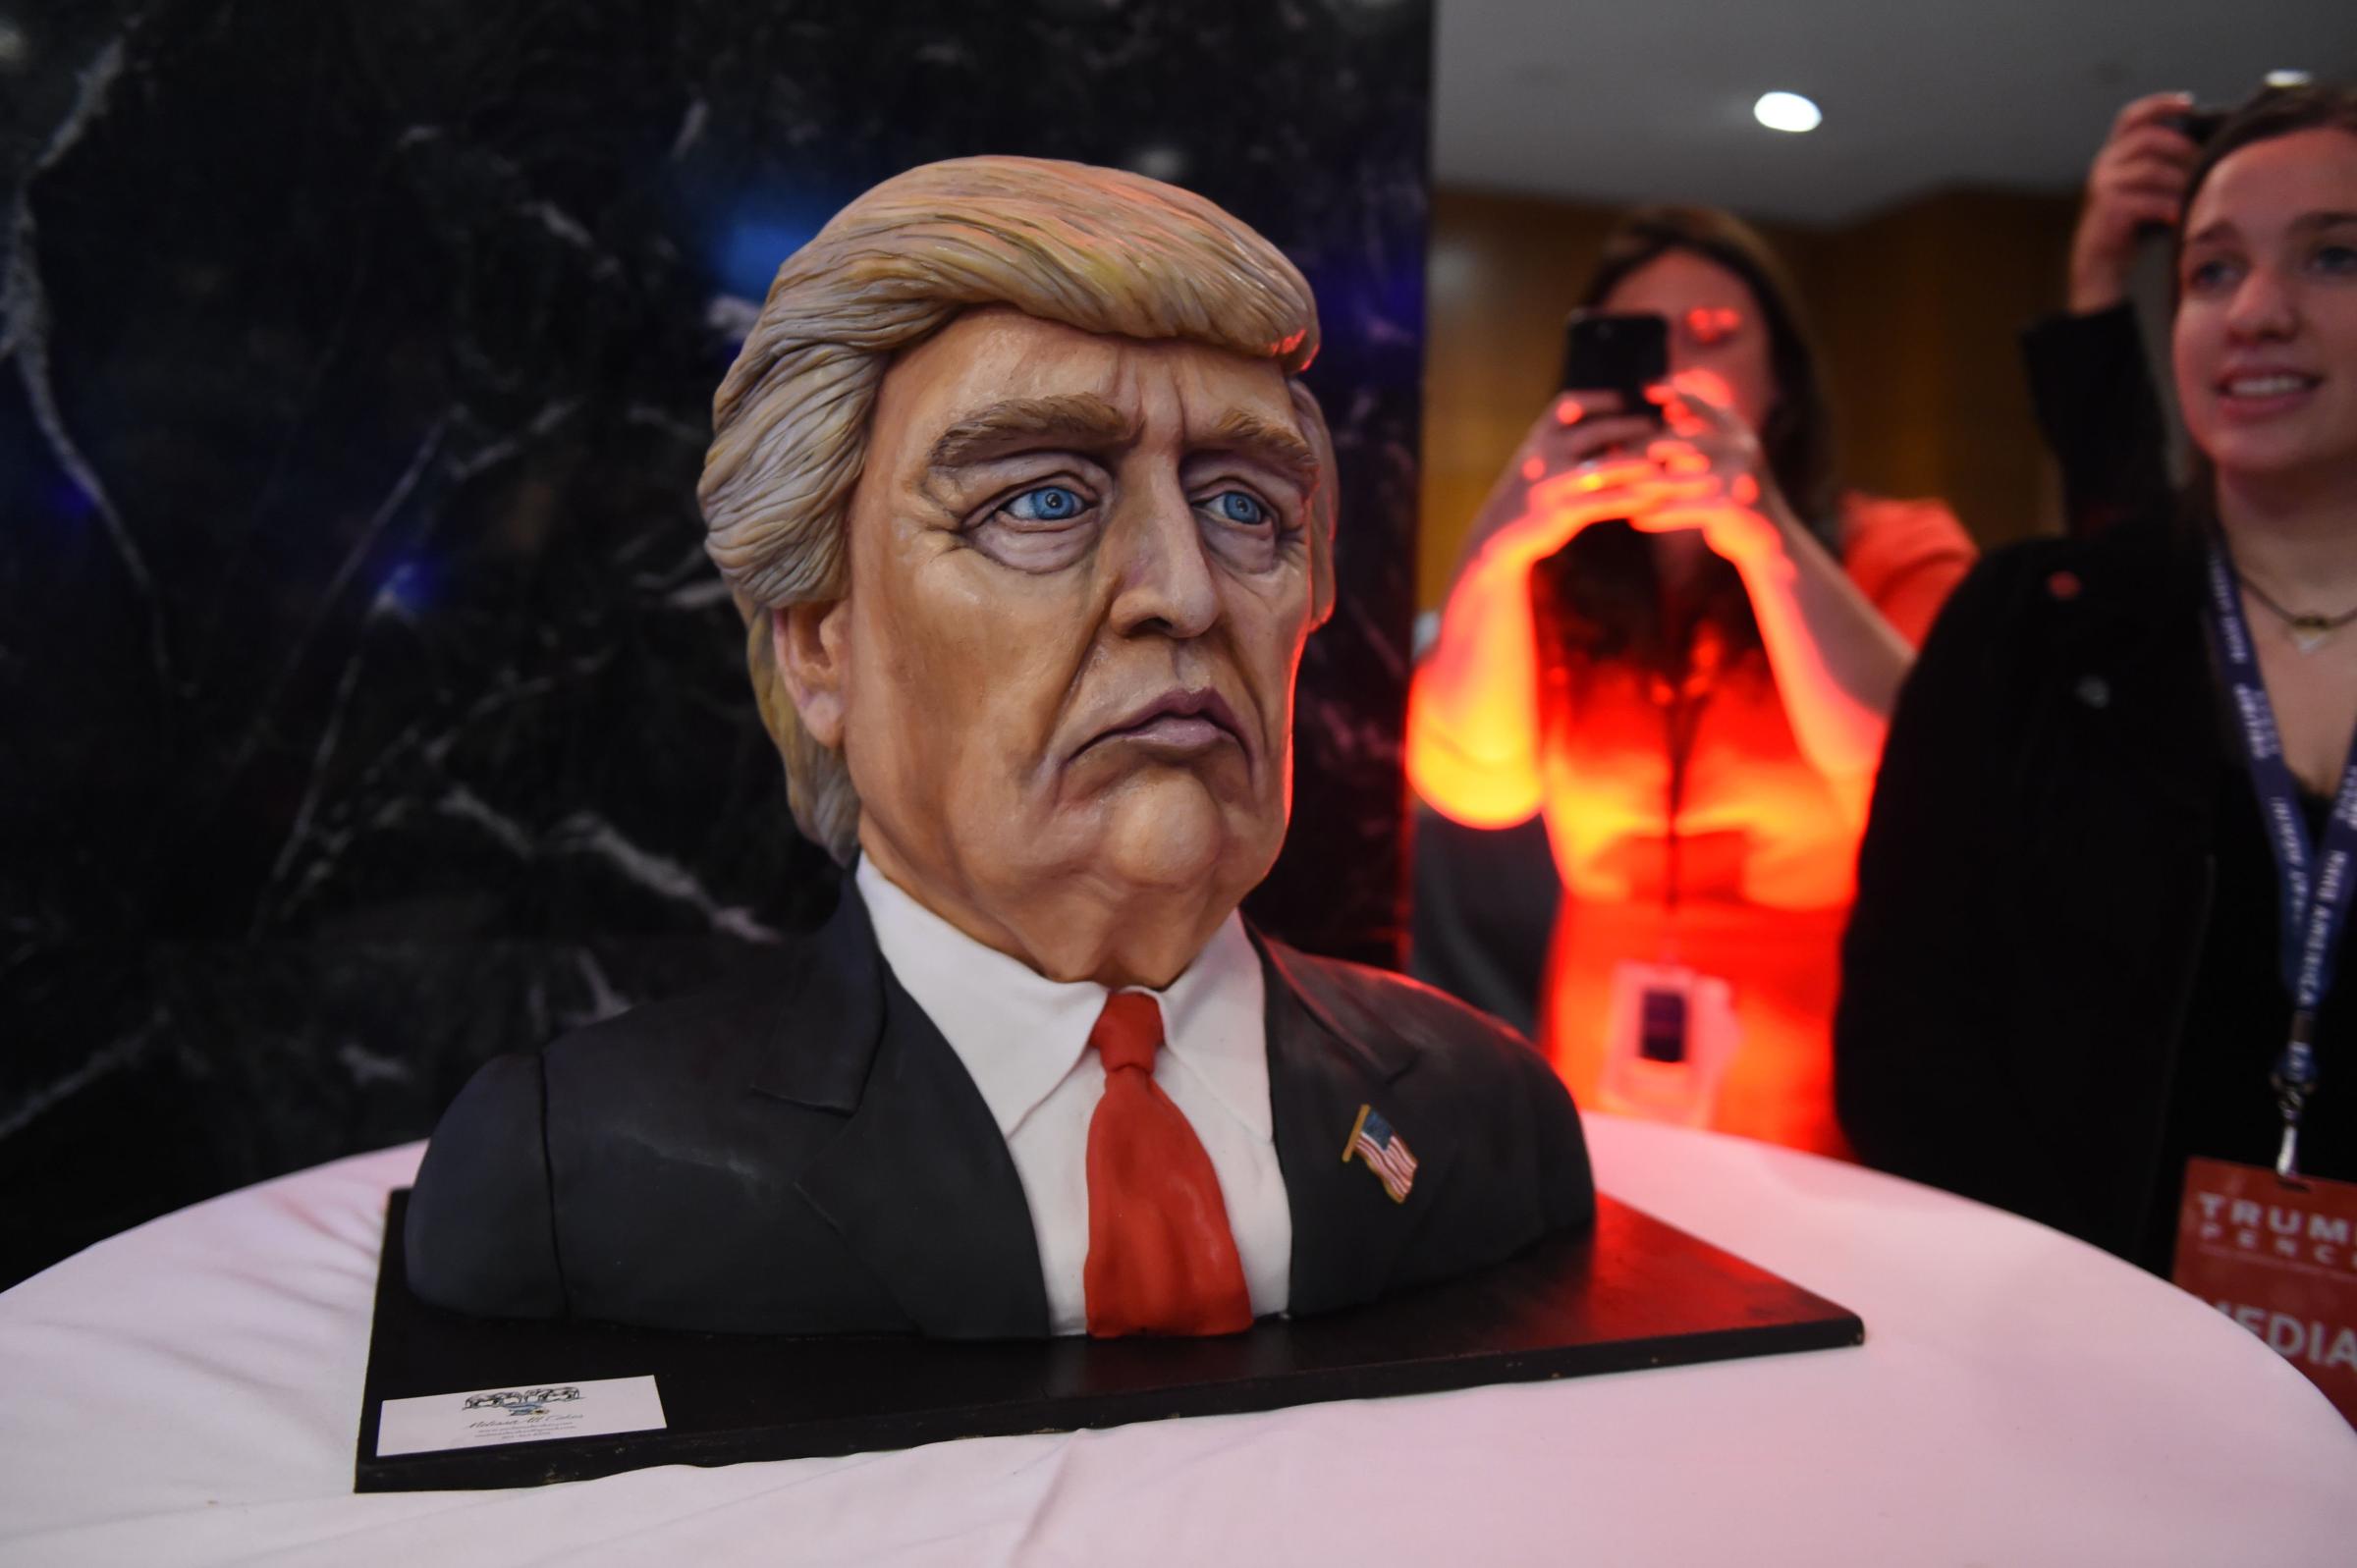 A cake in the likeness of Republican presidential nominee Donald Trump is on display at his election night event at the New York Hilton Midtown in New York.